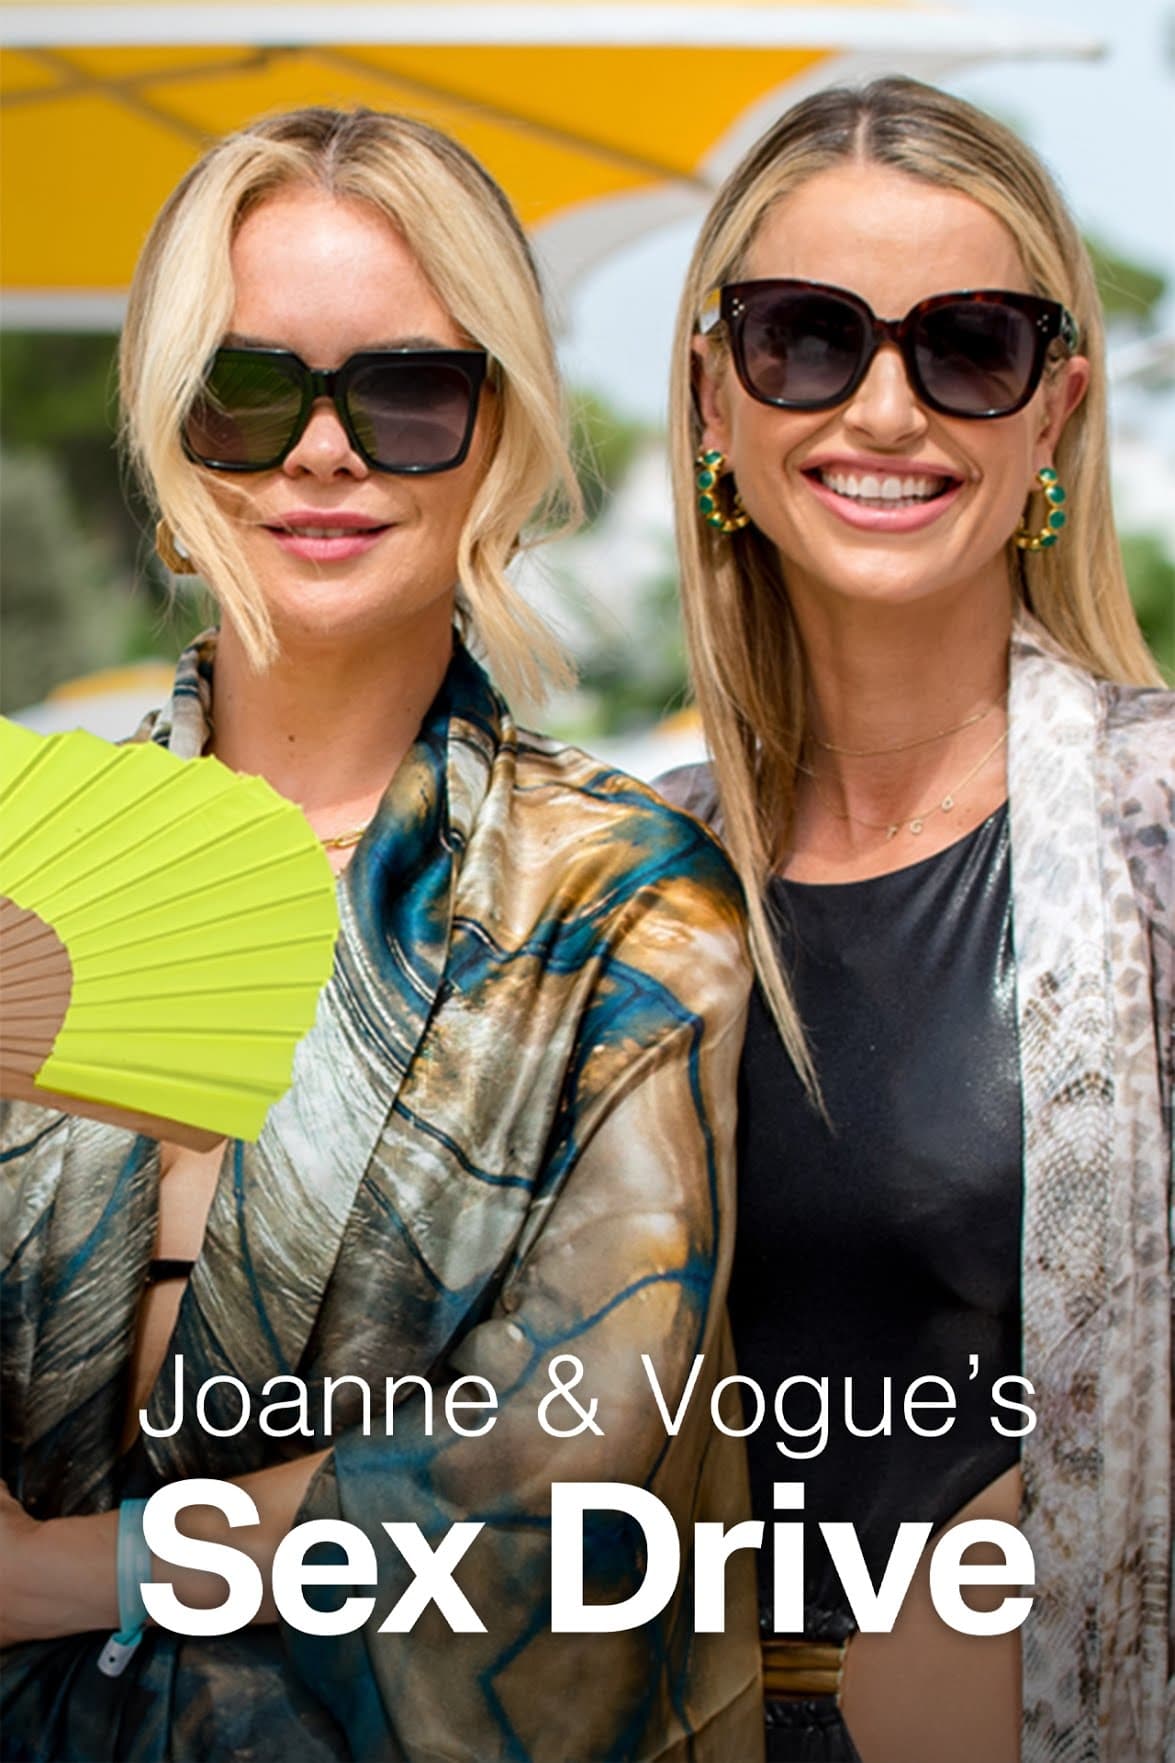 Joanne and Vogue's Sex Drive